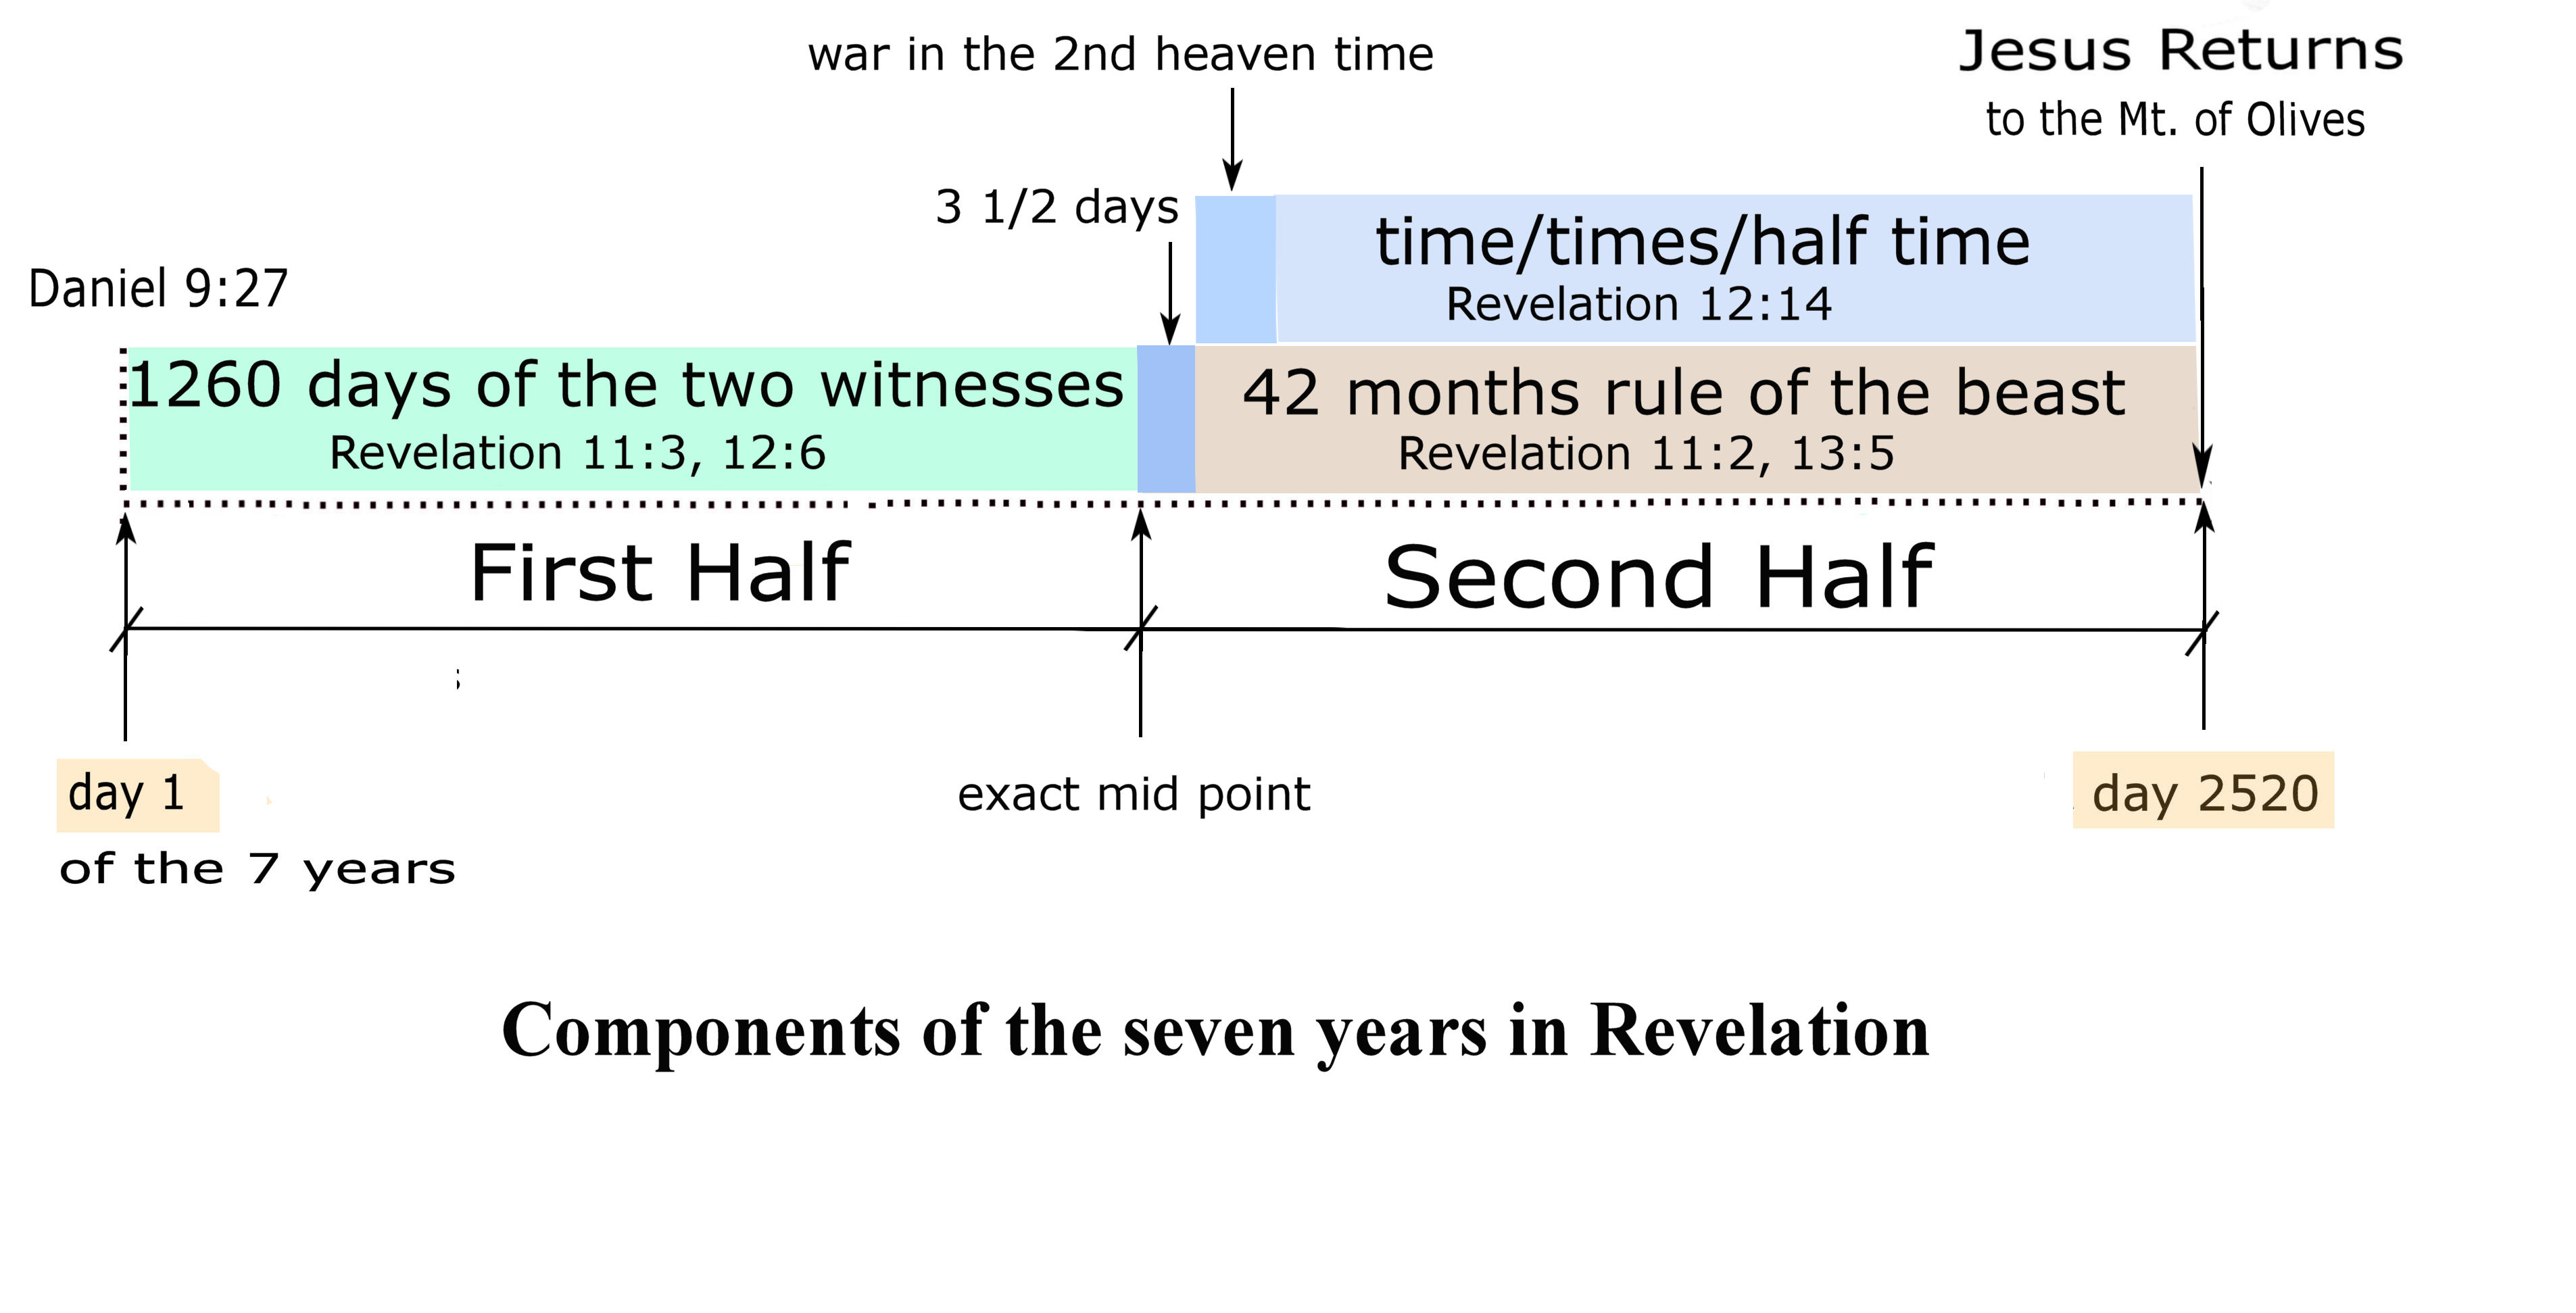 compoinets of the seven years in Revelaiton.jpg